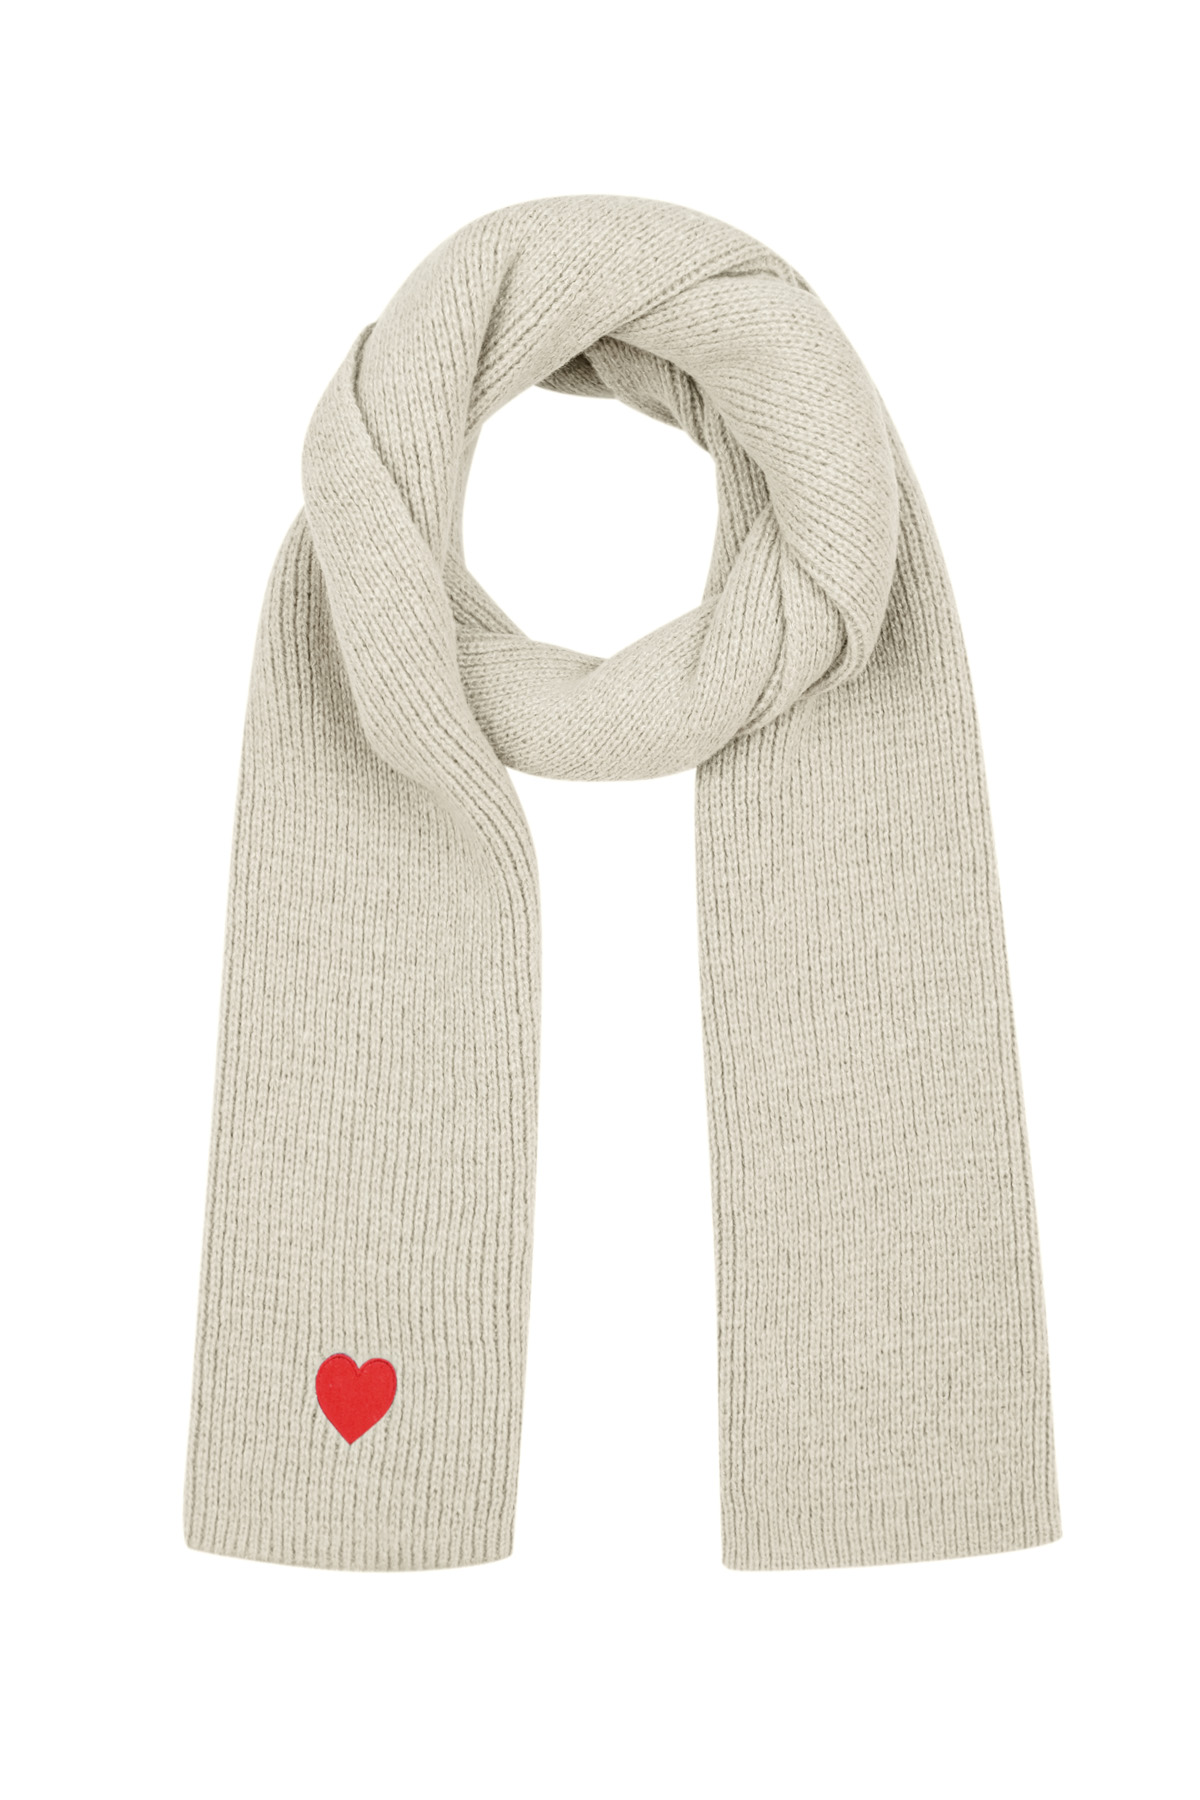 Winter scarf with heart detail - off-white